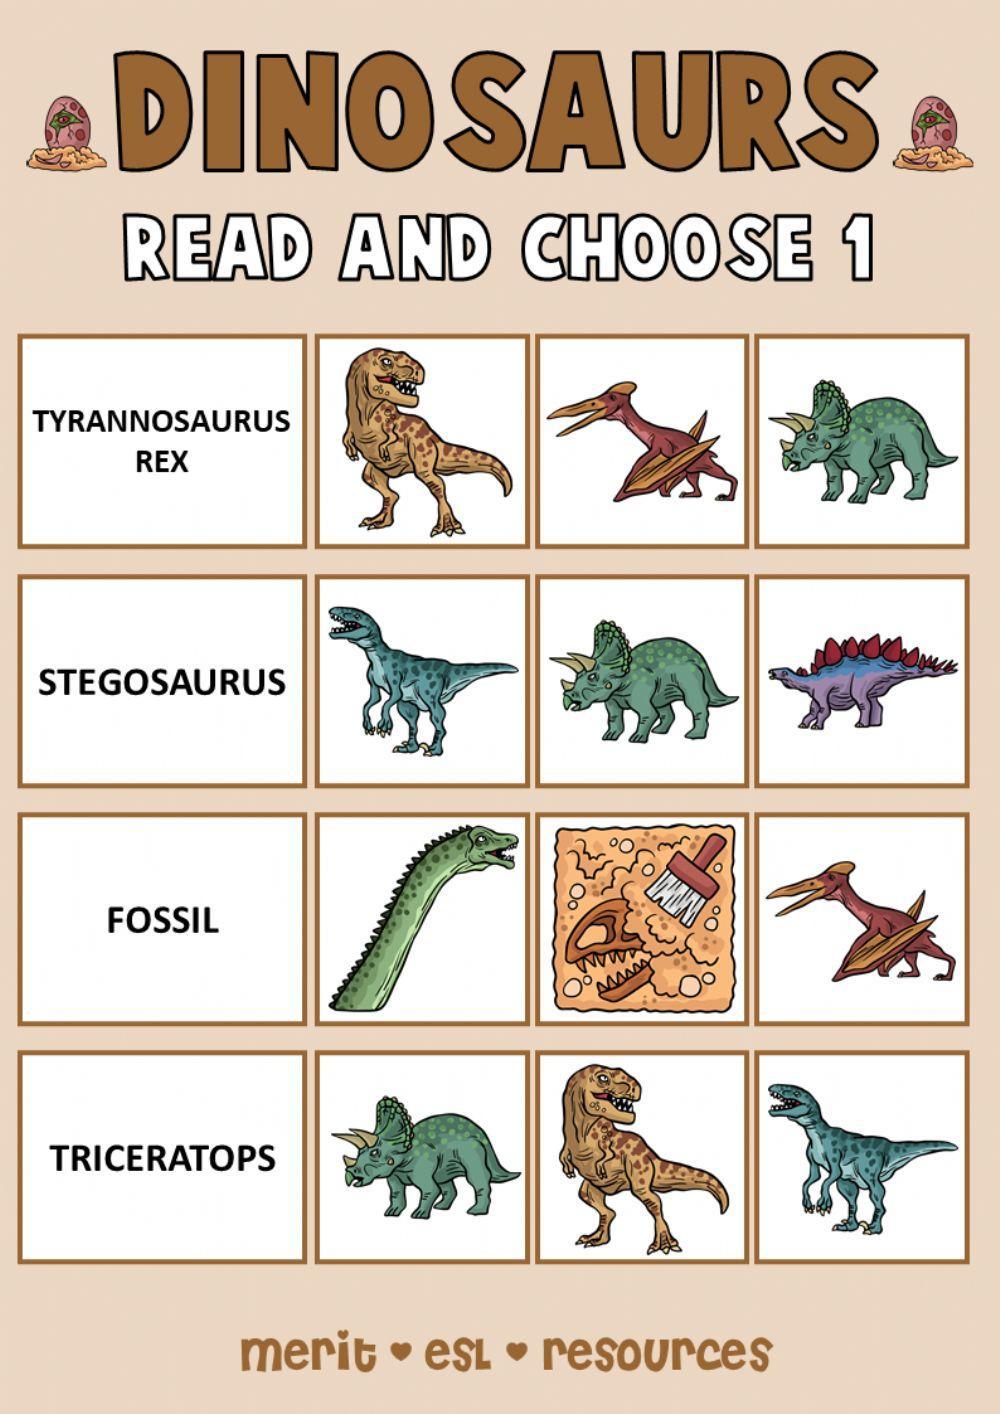 Dinosaurs - Read and choose 1